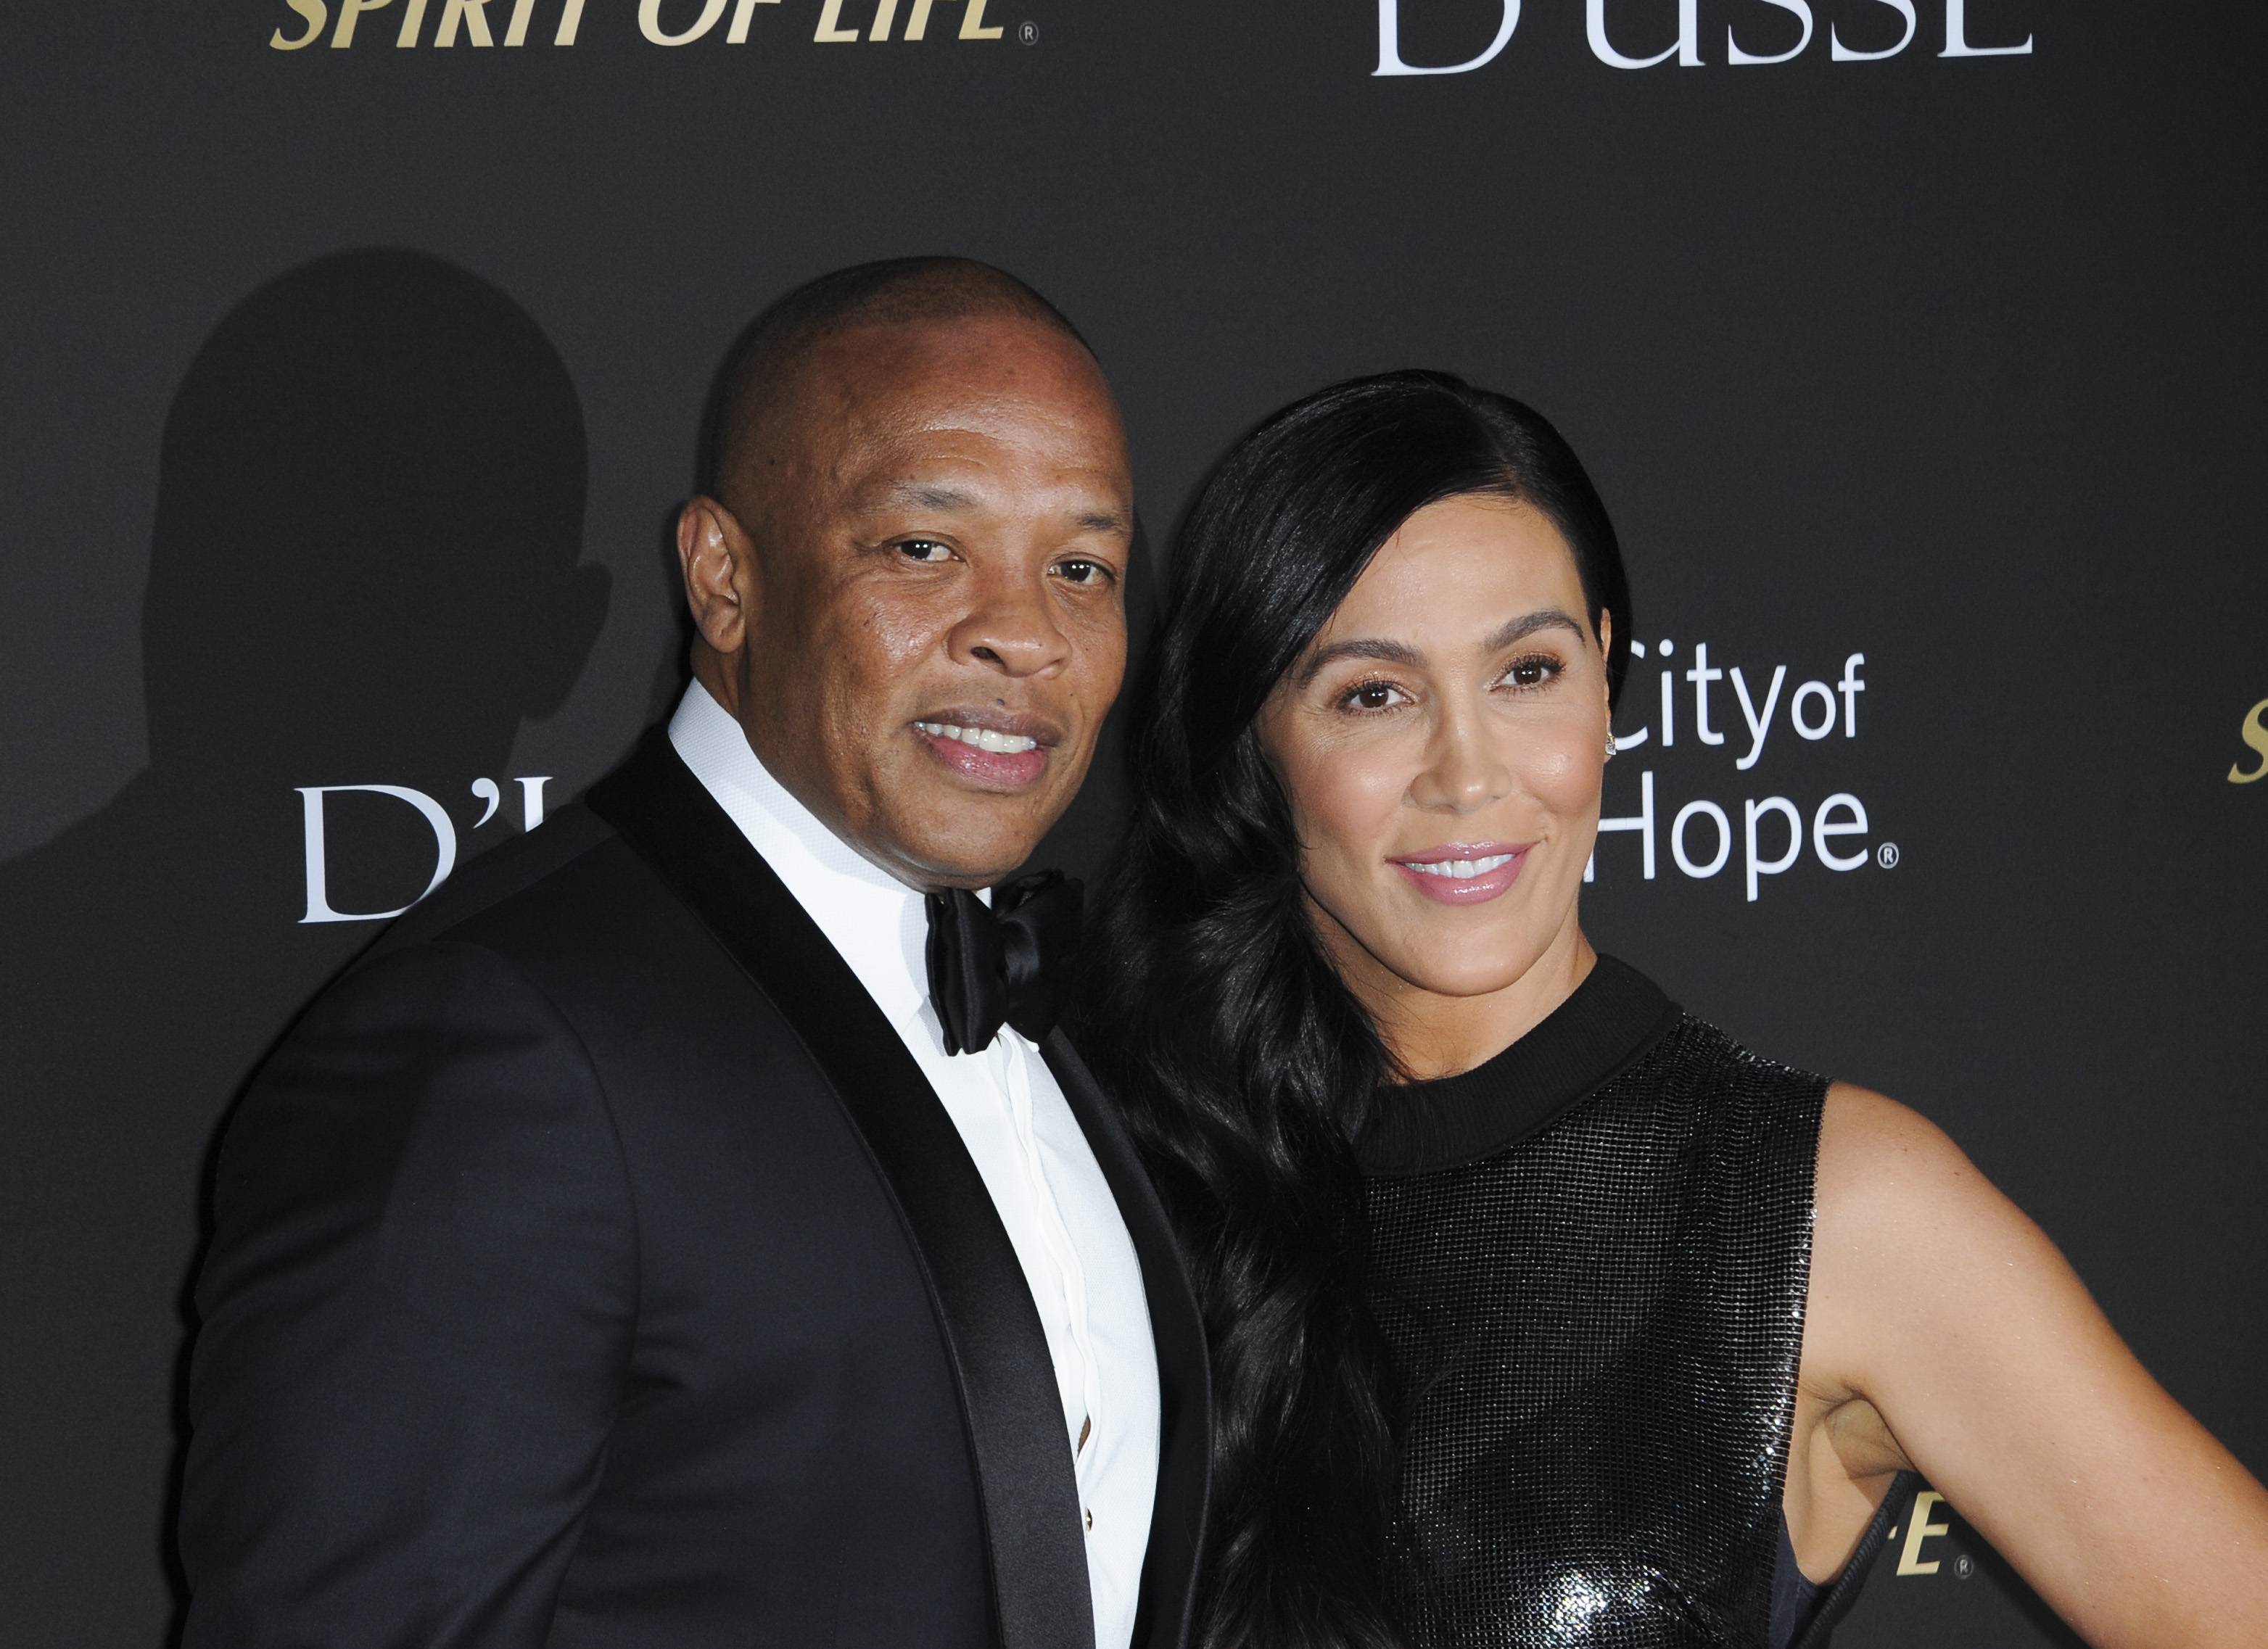 Dr. Dre Reveals Texts Sent To Nicole Young And Said He ‘Doesn’t Know The Woman’ He Married